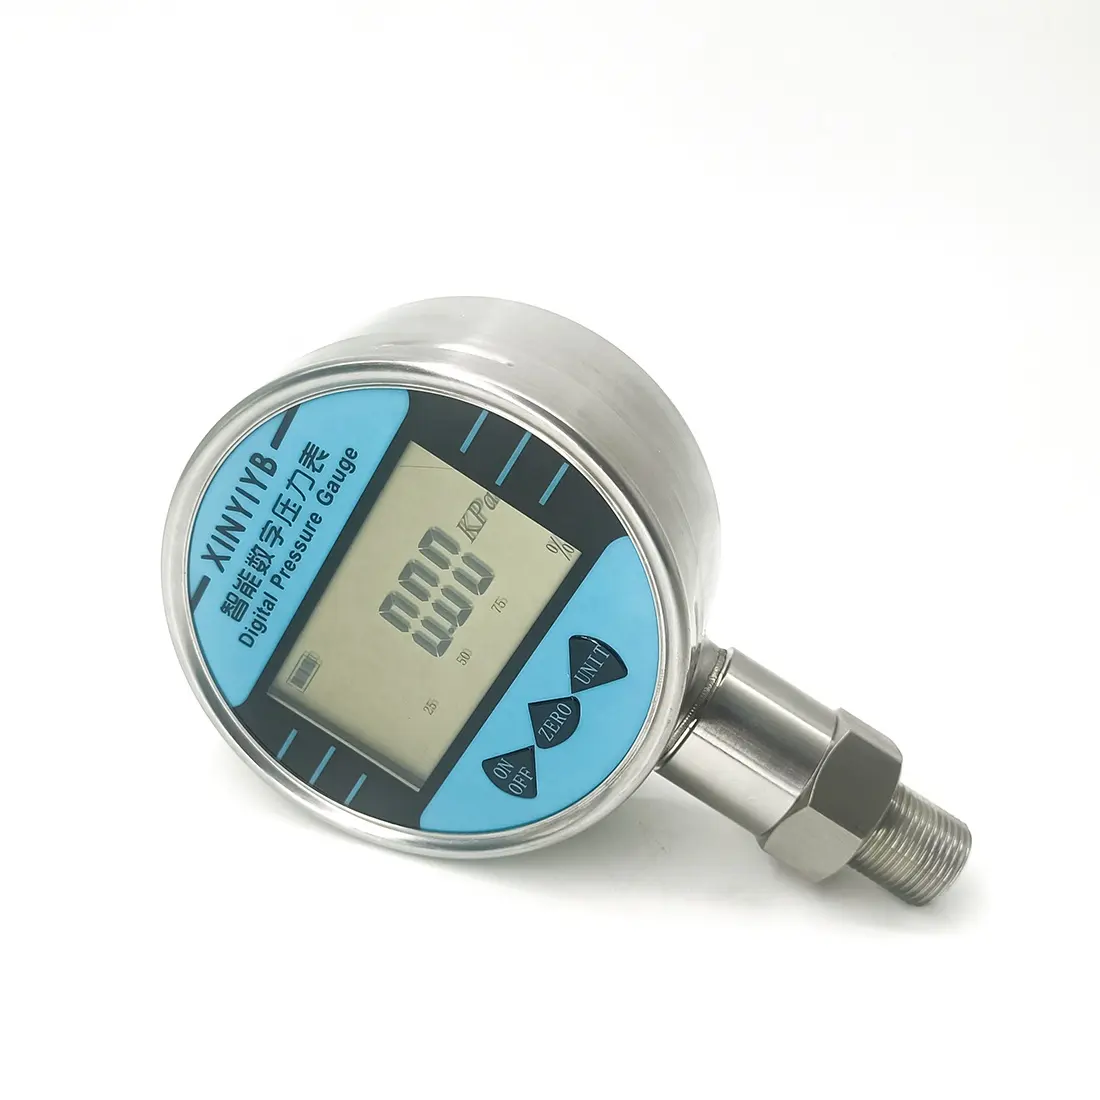 High precision digital pressure gauge for calibration with cans certificate